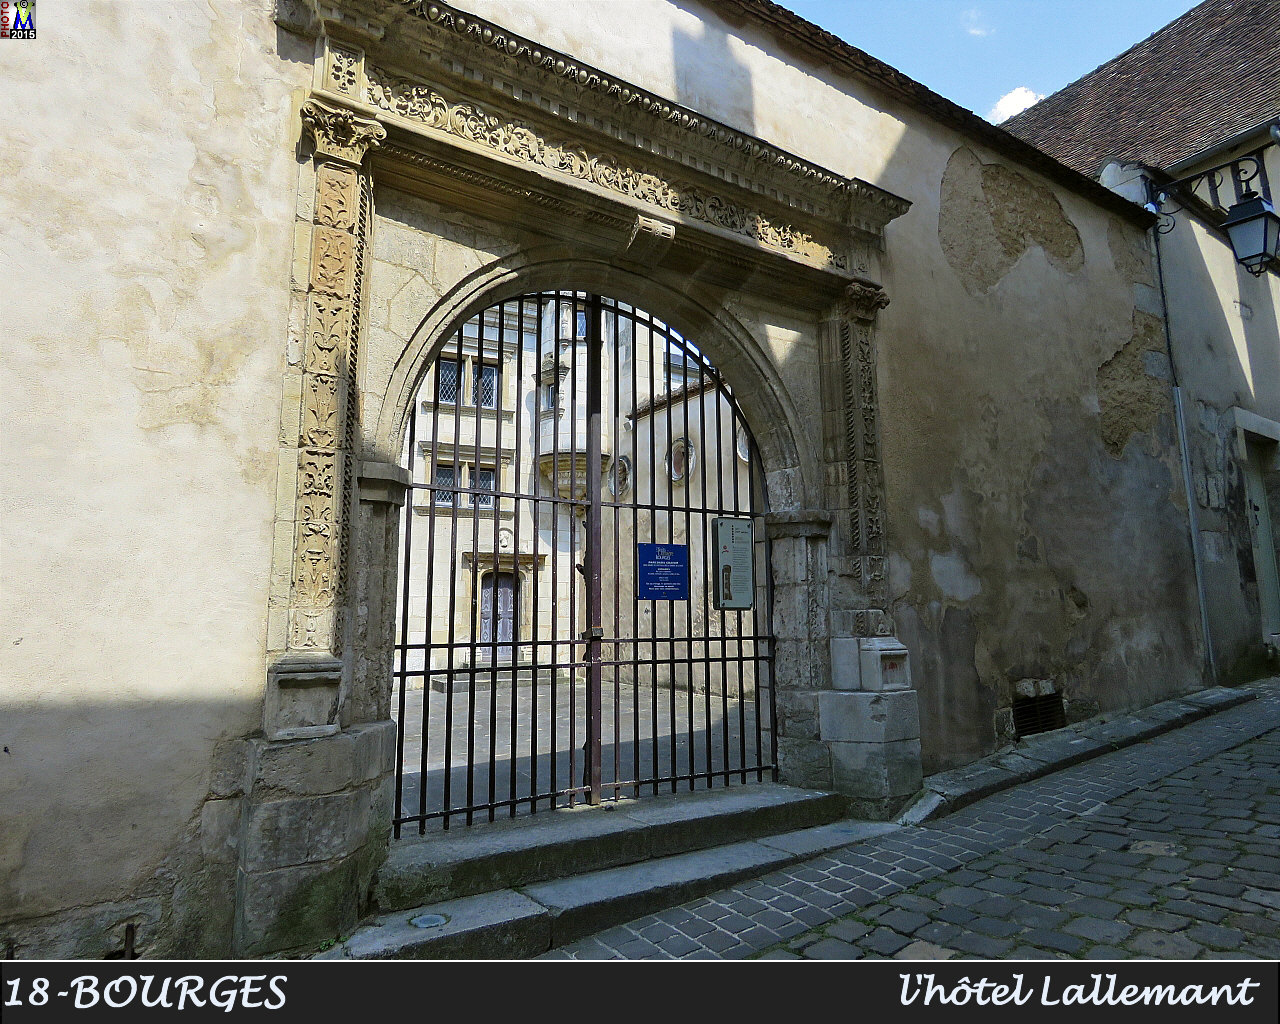 18BOURGES-hotelLallemant_112.jpg